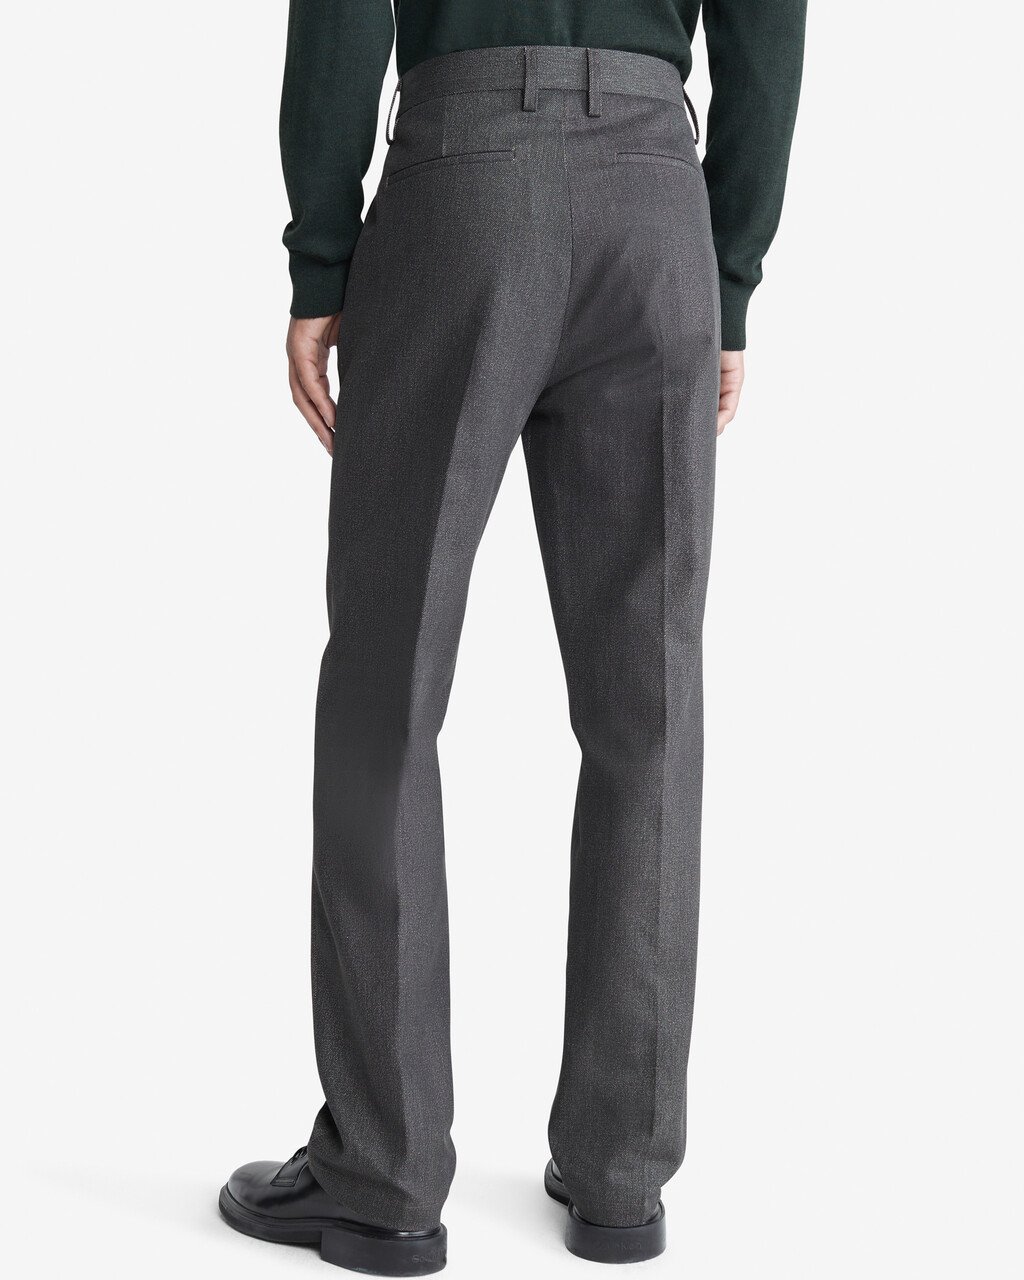 Standards Structured Pants, CHARCOAL SMOKE WASH, hi-res